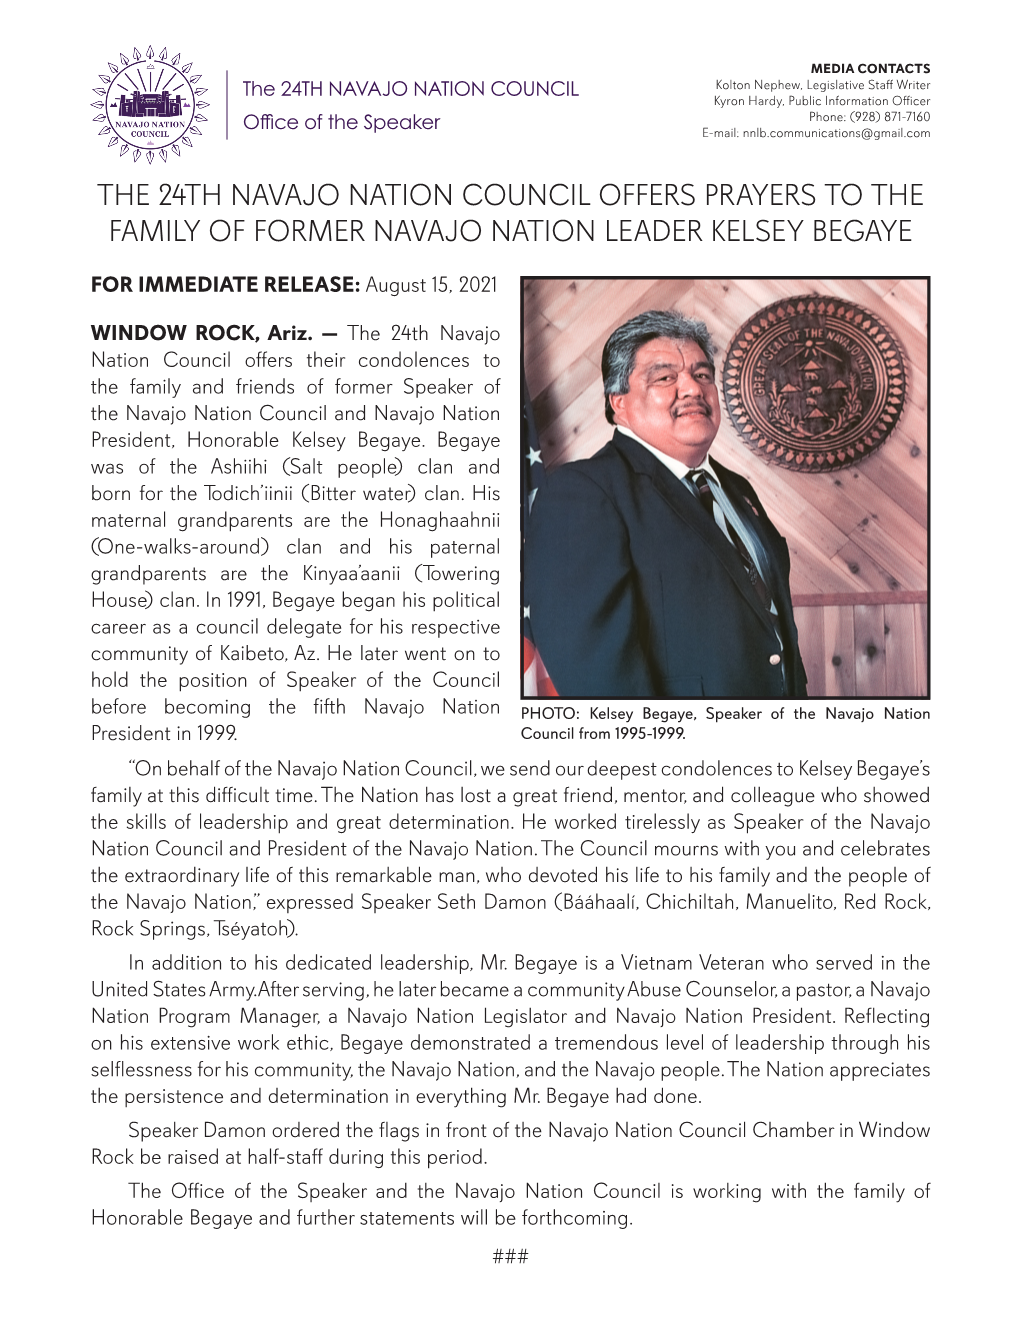 The 24Th Navajo Nation Council Offers Prayers to the Family of Former Navajo Nation Leader Kelsey Begaye